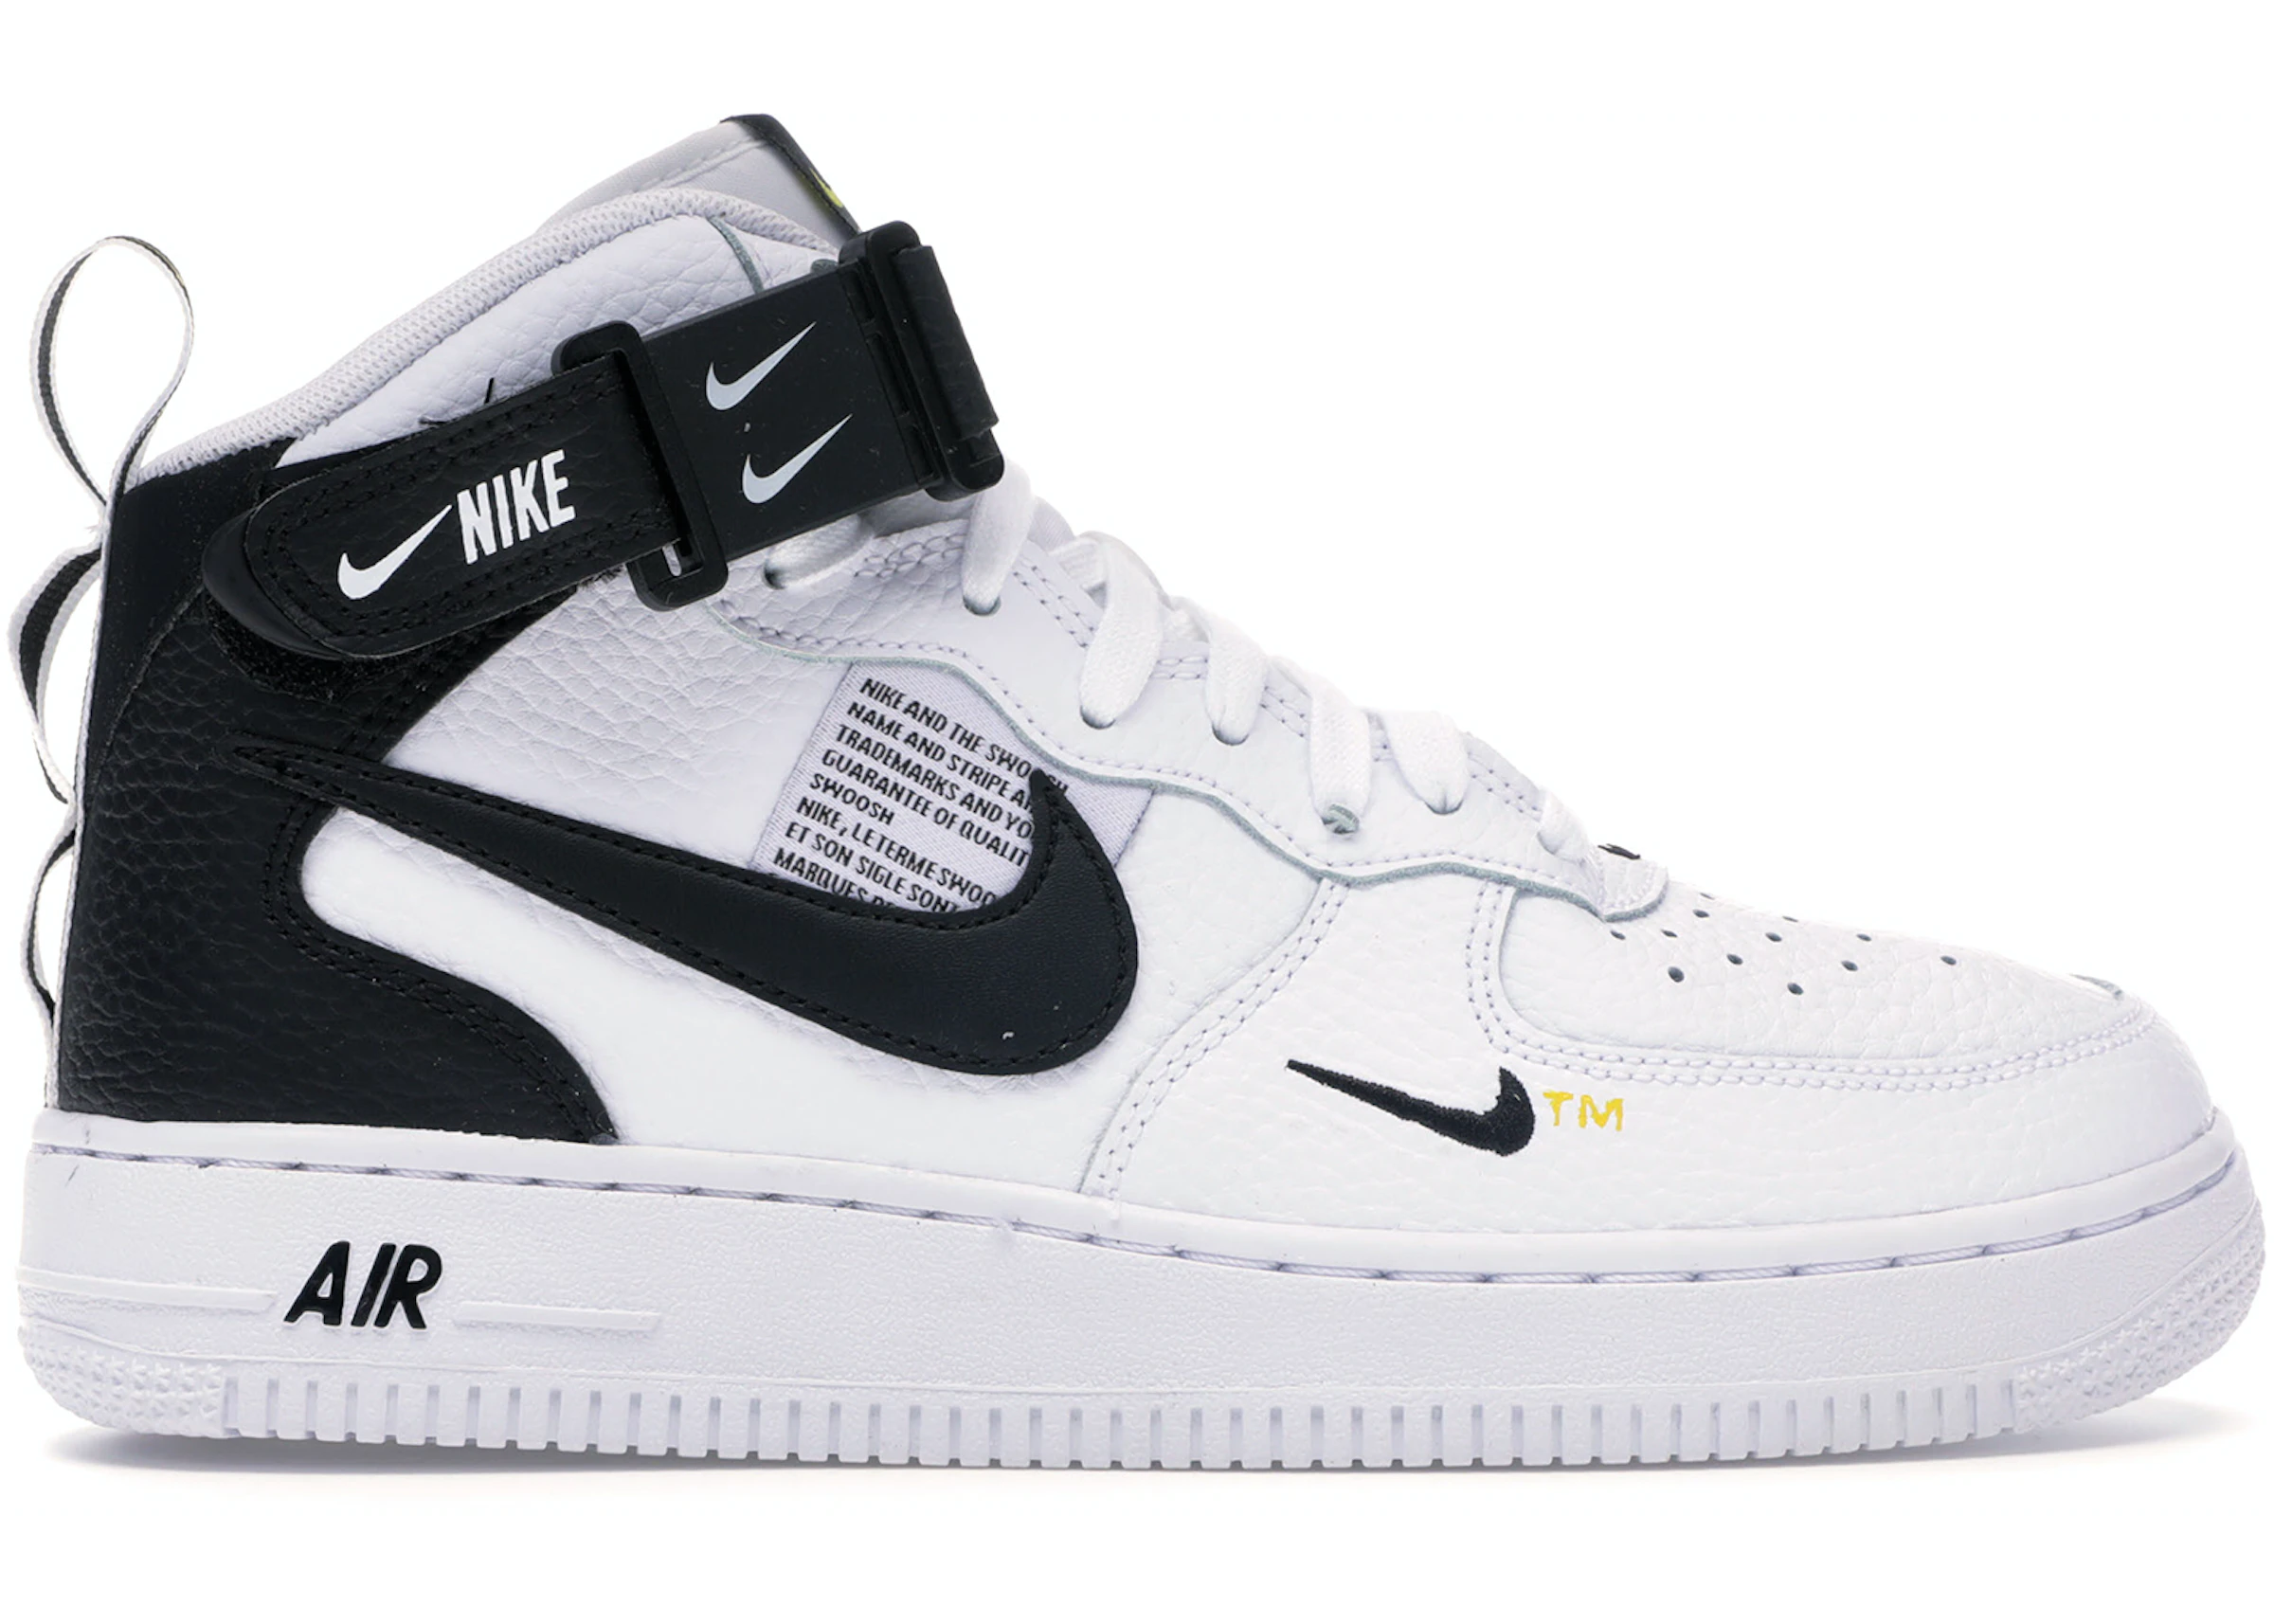 Coin laundry Every week Derbeville test Nike Air Force 1 Mid Utility White Black (GS) - AV3803-100 - US